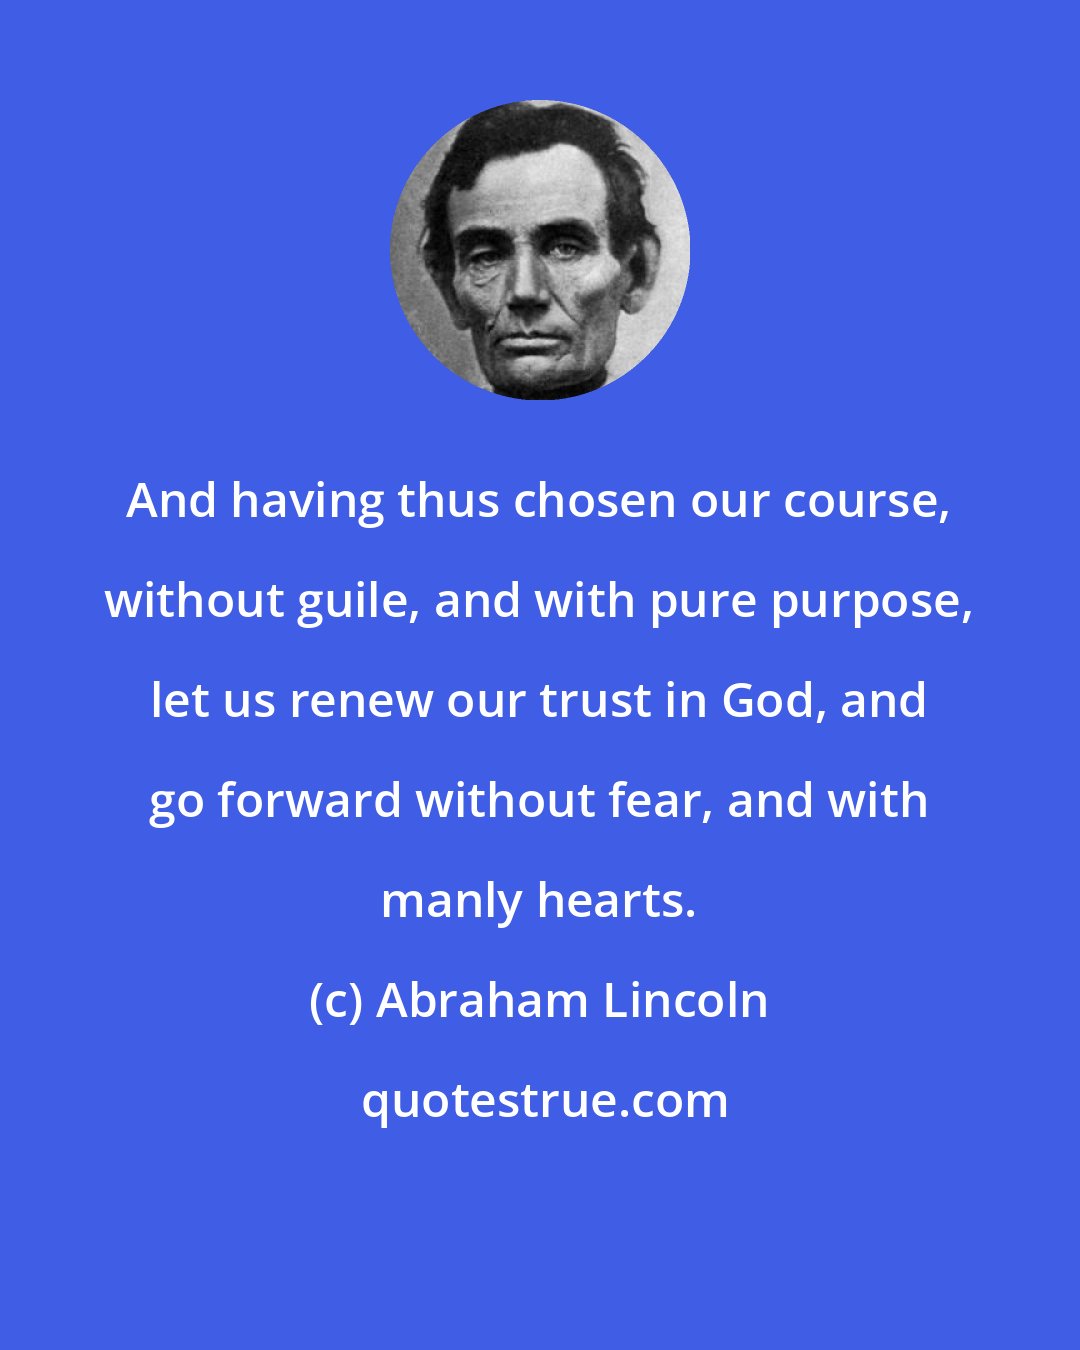 Abraham Lincoln: And having thus chosen our course, without guile, and with pure purpose, let us renew our trust in God, and go forward without fear, and with manly hearts.